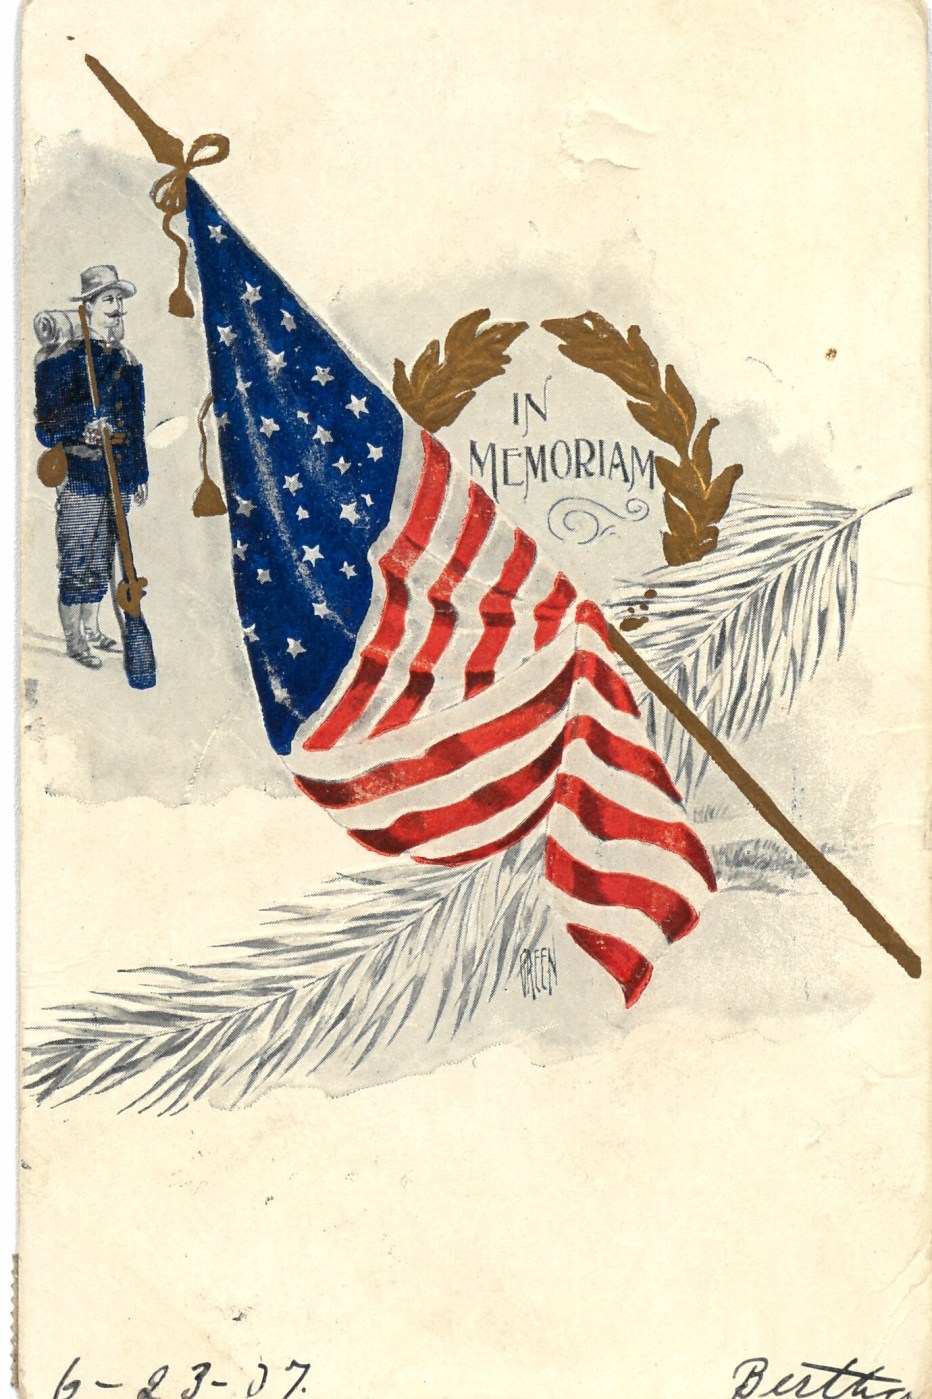 “In Memoriam,” no publisher, cancelled July 23, 1907. Handwritten date on front “6-23-1907.” Union soldier holding a rifle, American flag, feather, and laurel wreath. (NCA)